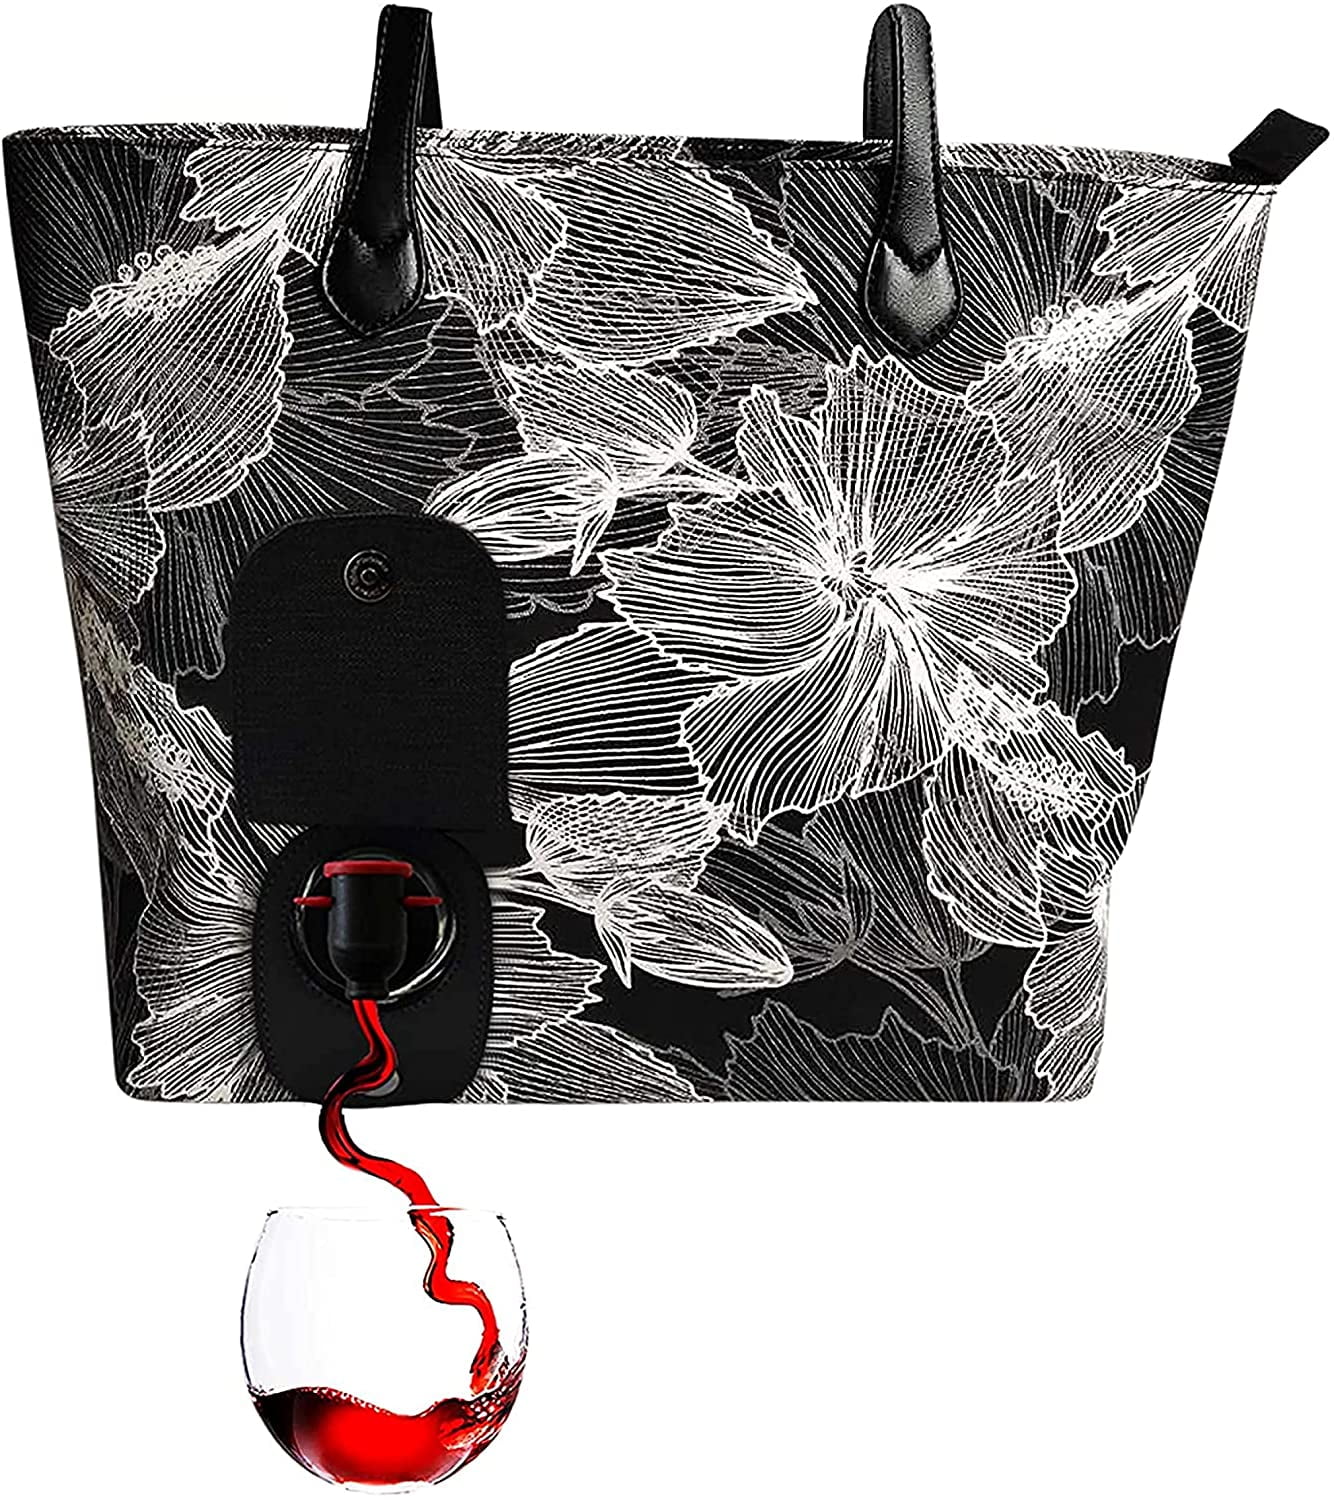 Black PortoVino Wine Tote Holds 2 Bottles Of Wine! - Fashionable Handbag With Hidden Insulated Compartment